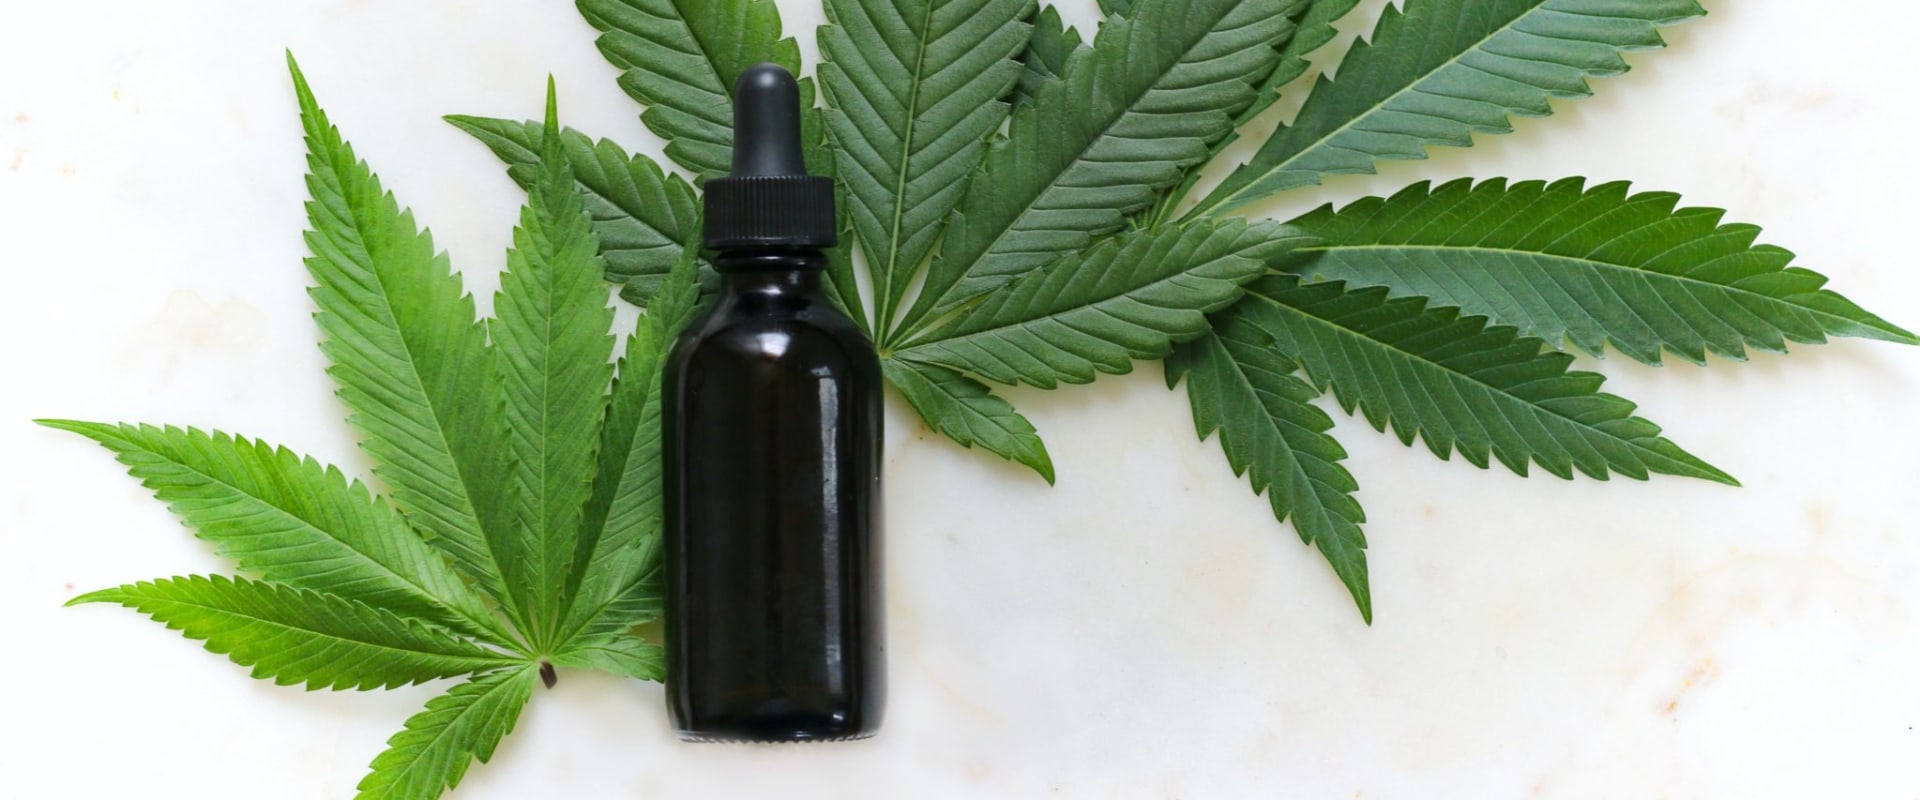 What are the health benefits of thc tincture?